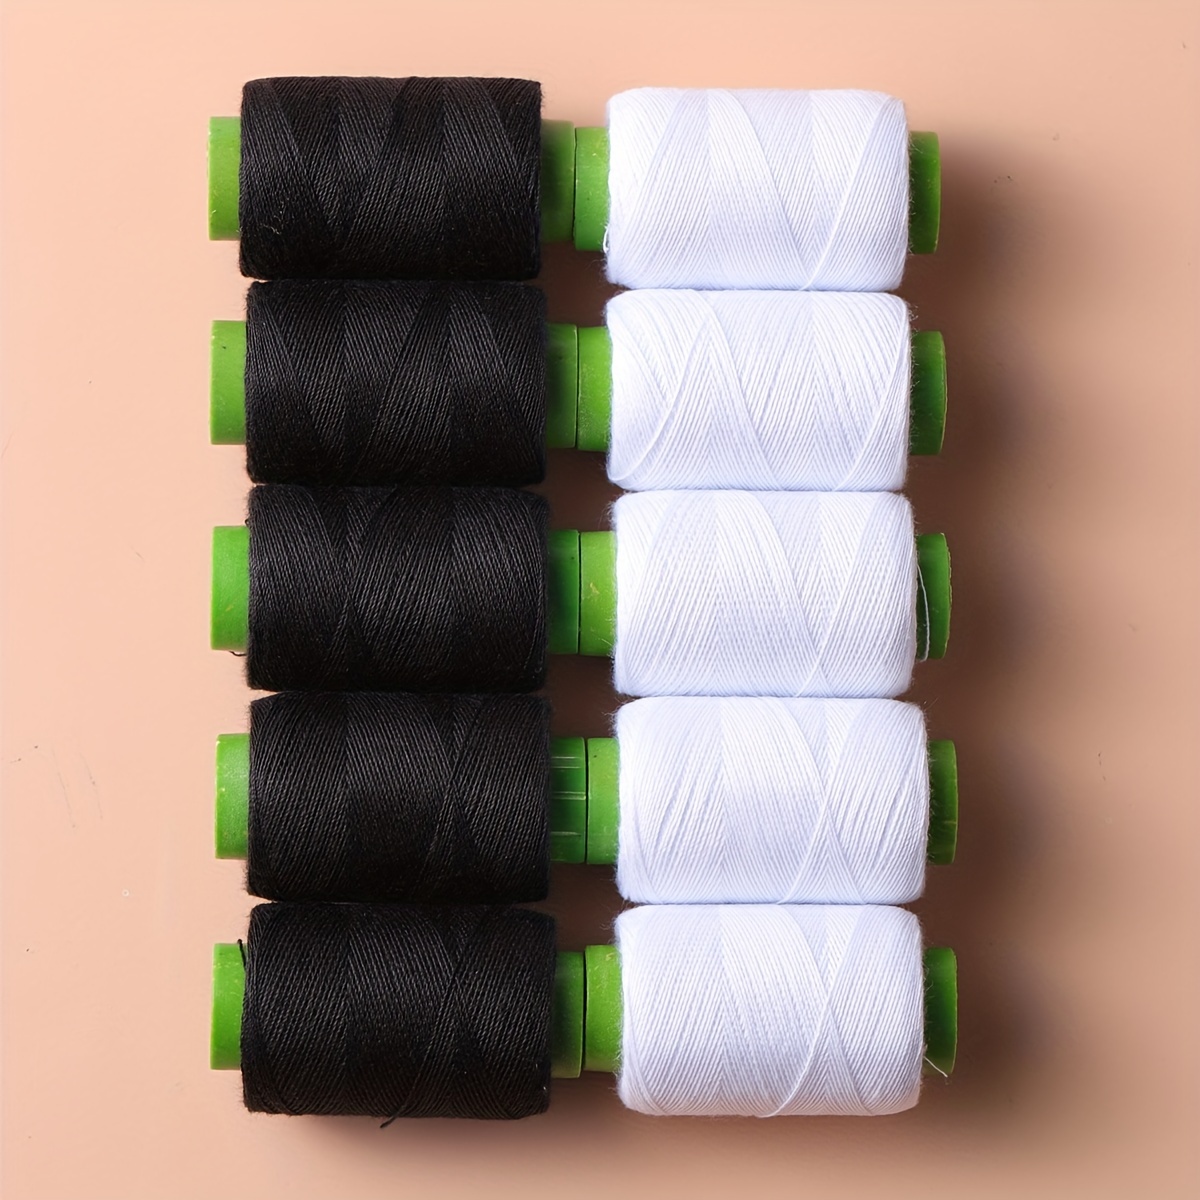 

Home Use 5 White + 5 Black Sewing Threads Suitable For Sewing Machines And Hand Sewing Clothes